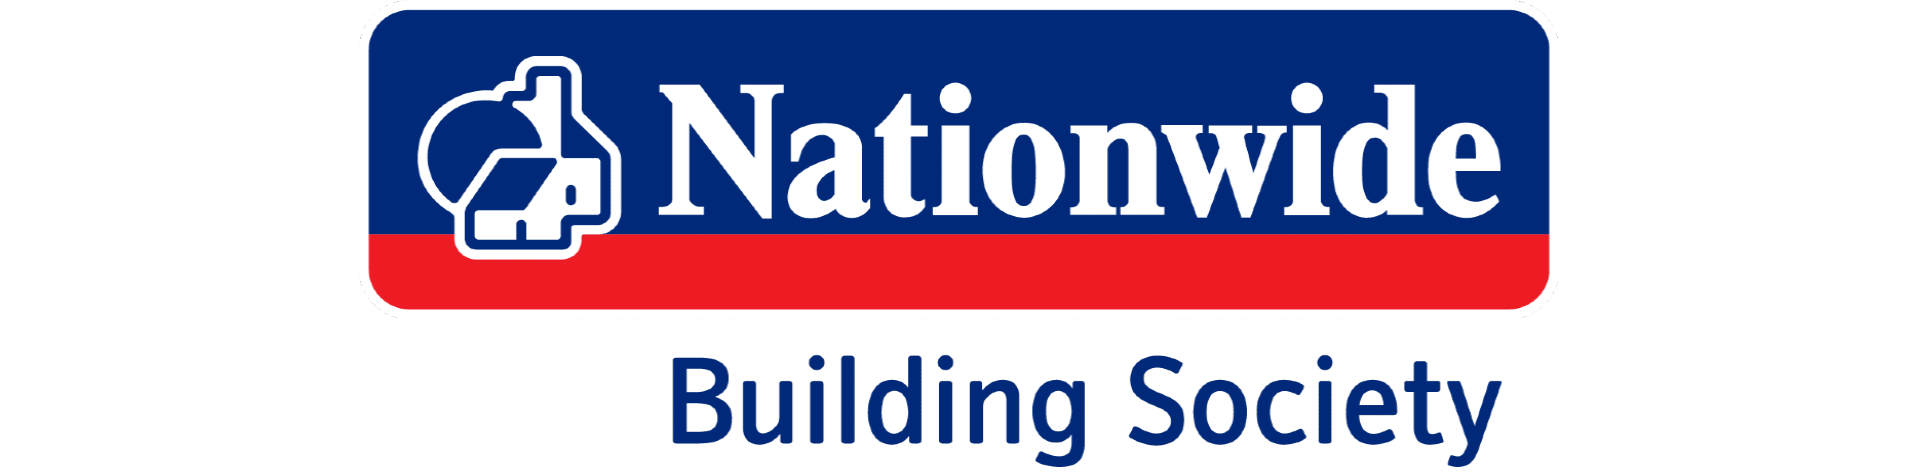 nationwide-building-society